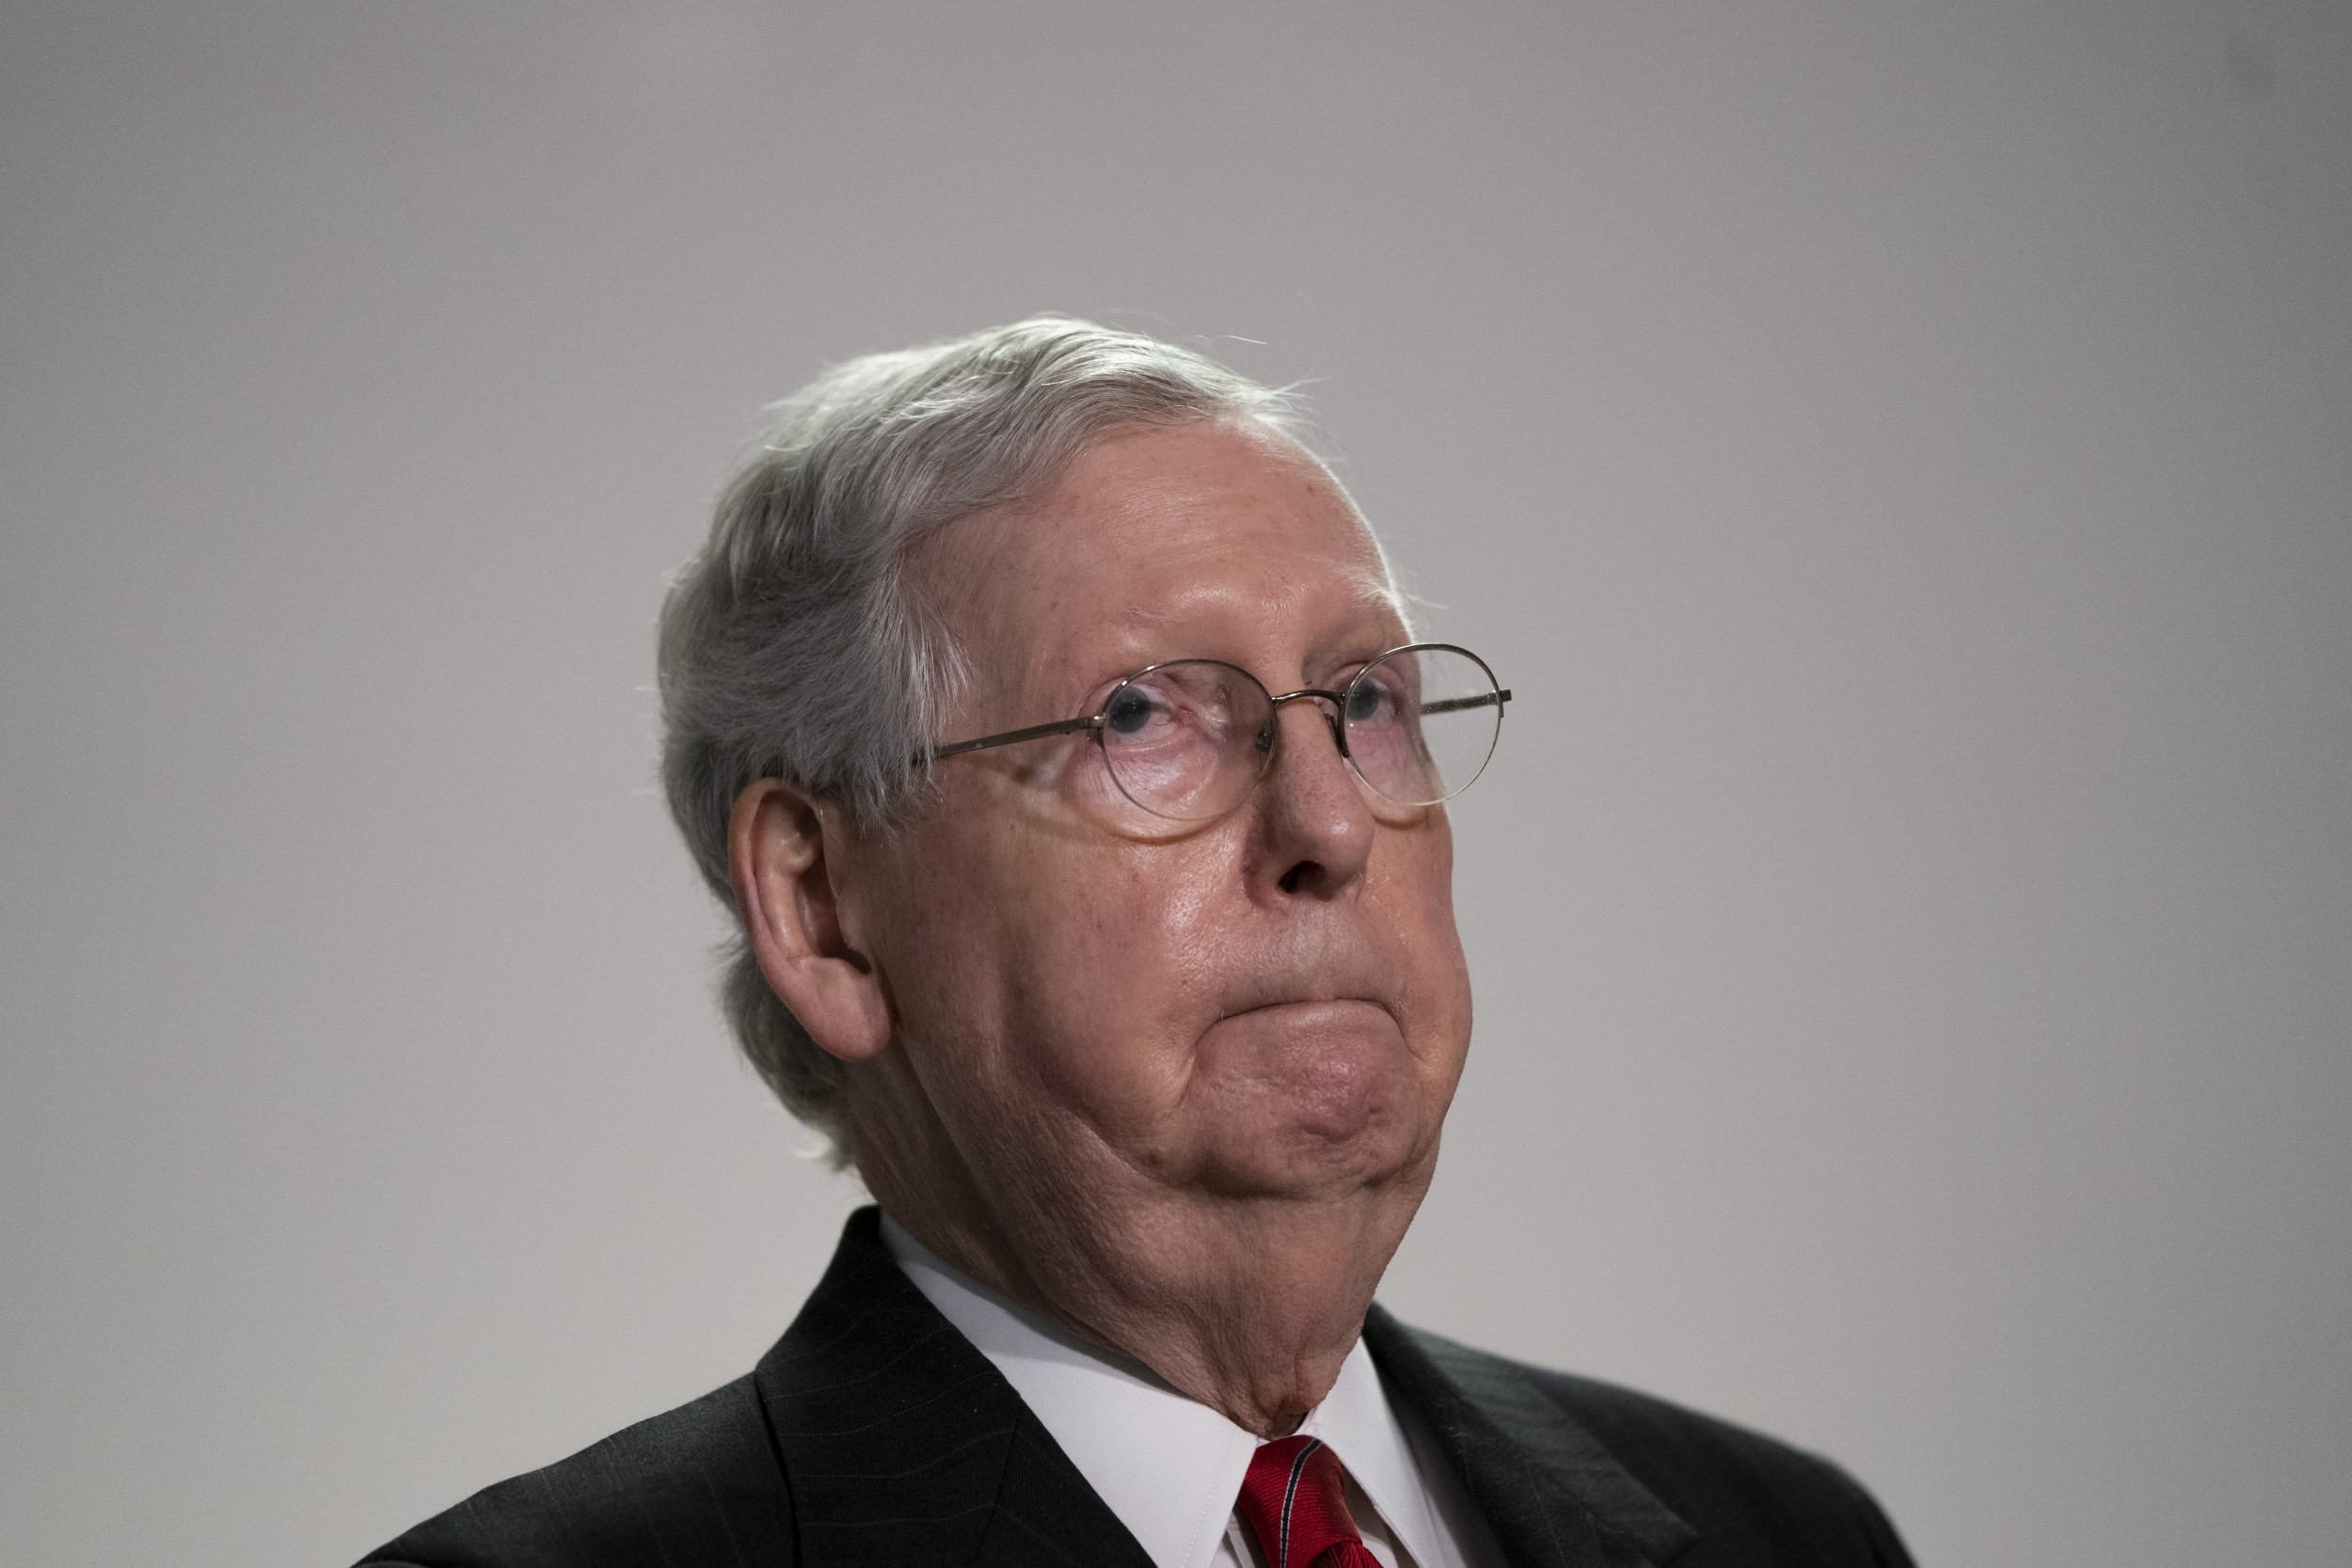 Mitch McConnell comes out against Marjorie Taylor Greene with removal attempts underway